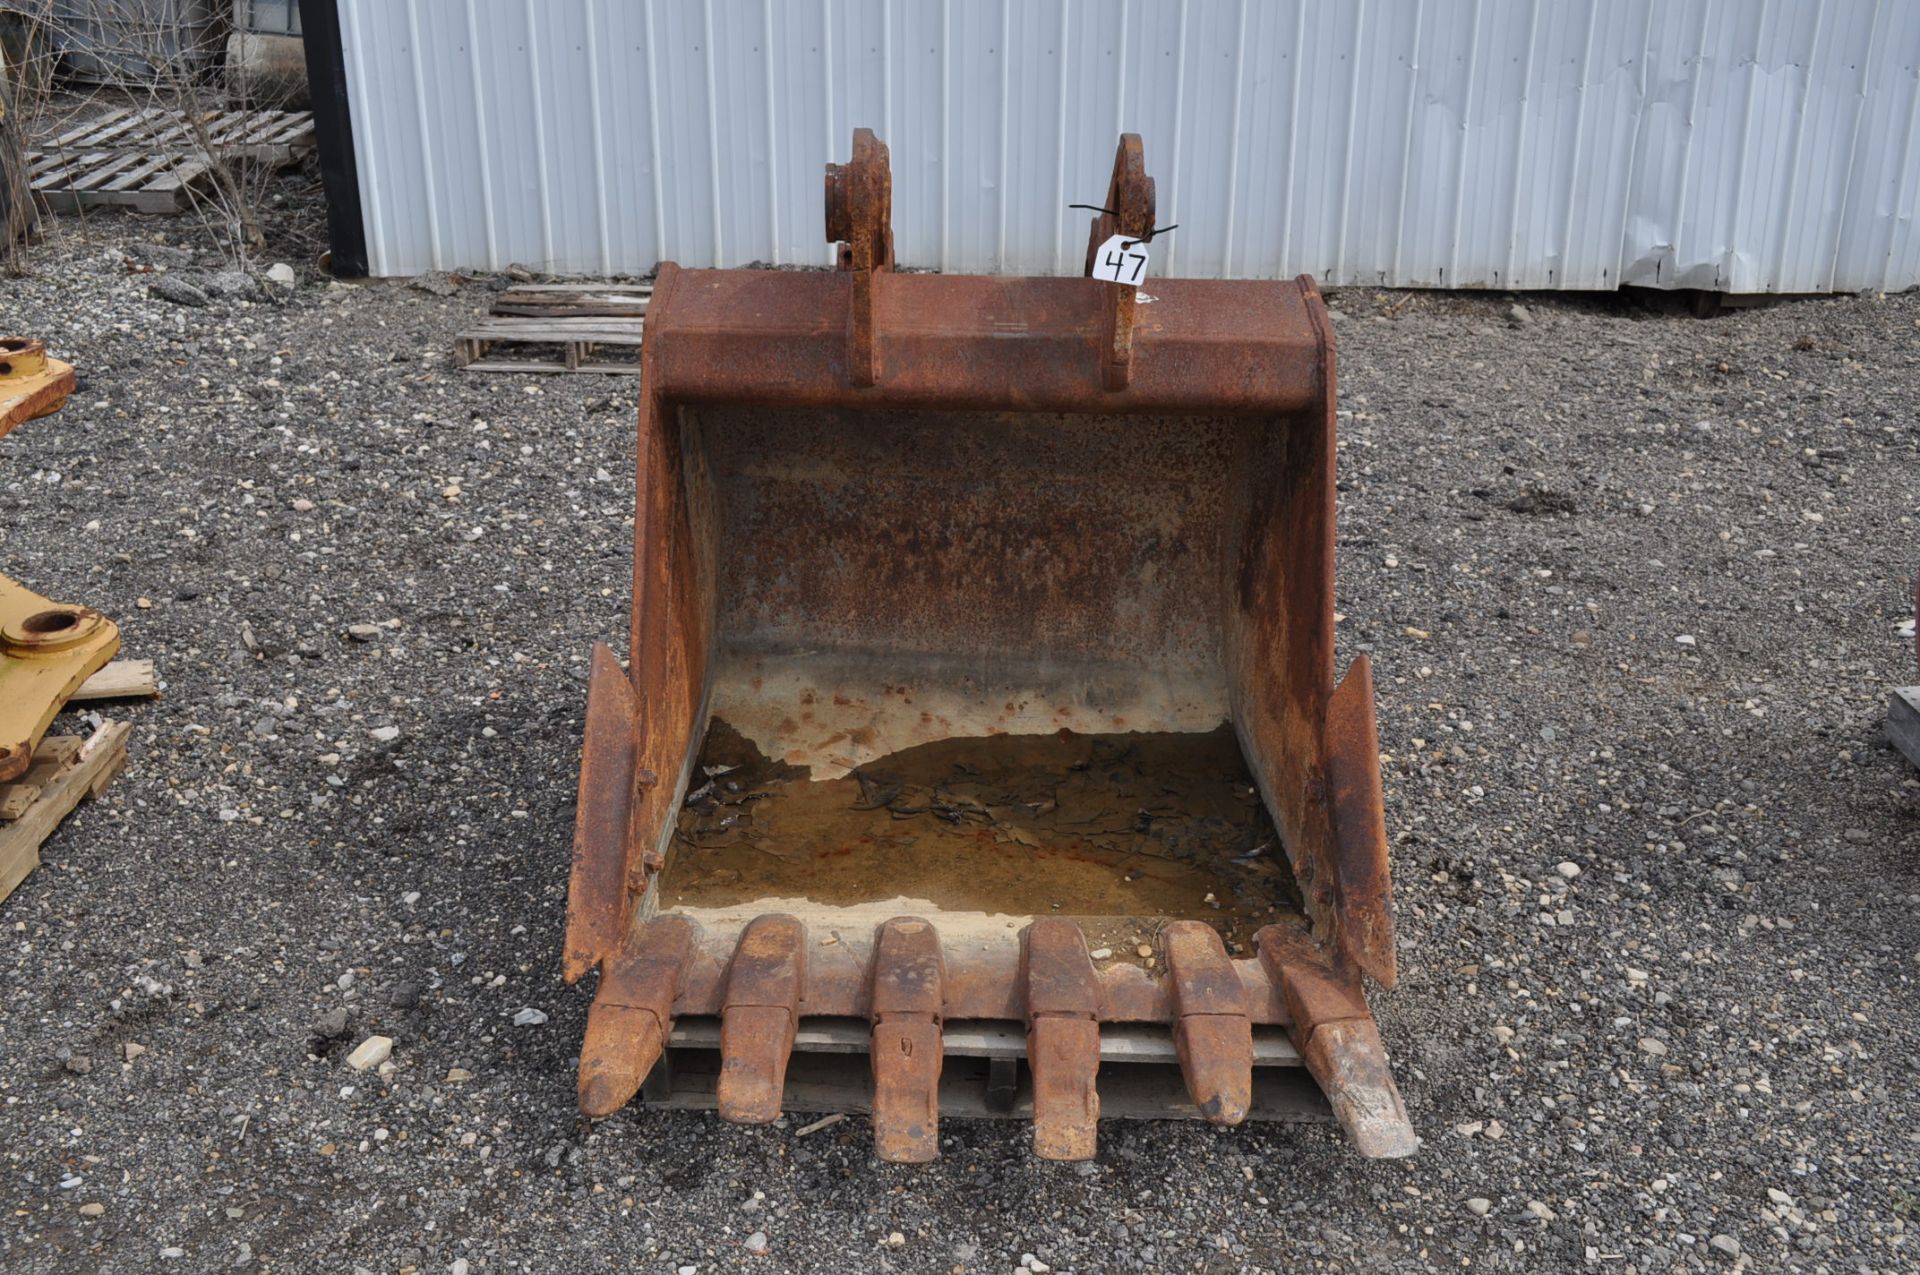 44” excavator bucket, 3” pin, 15 ½” center, WB with side cutters